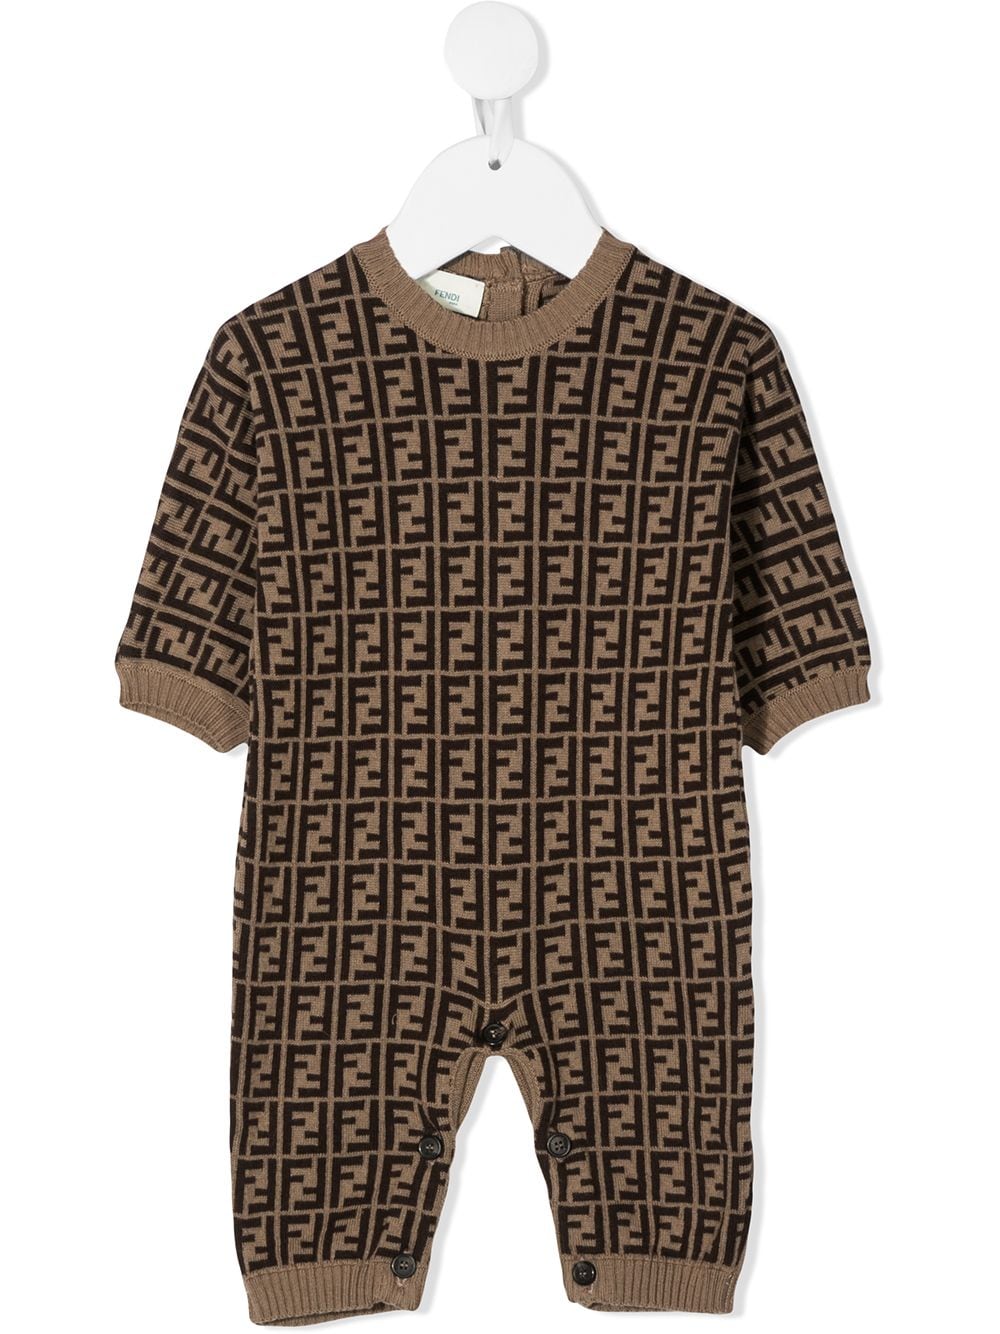 Brown baby onesie with logo